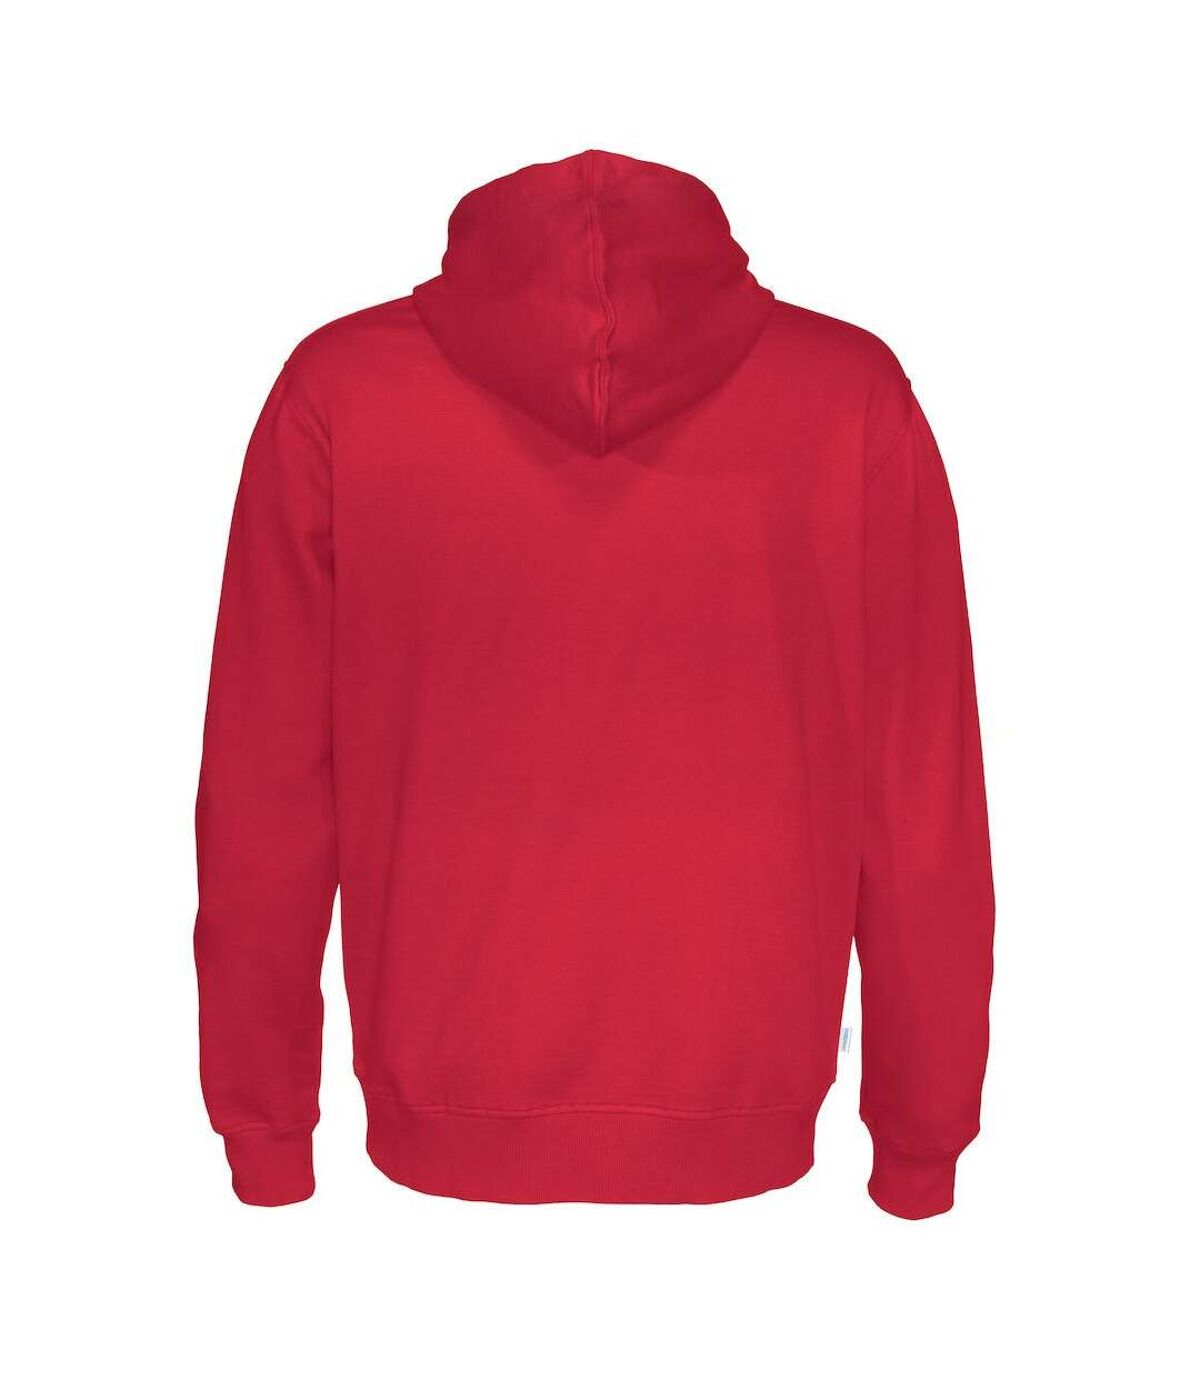 Cottover Mens Hoodie (Red)